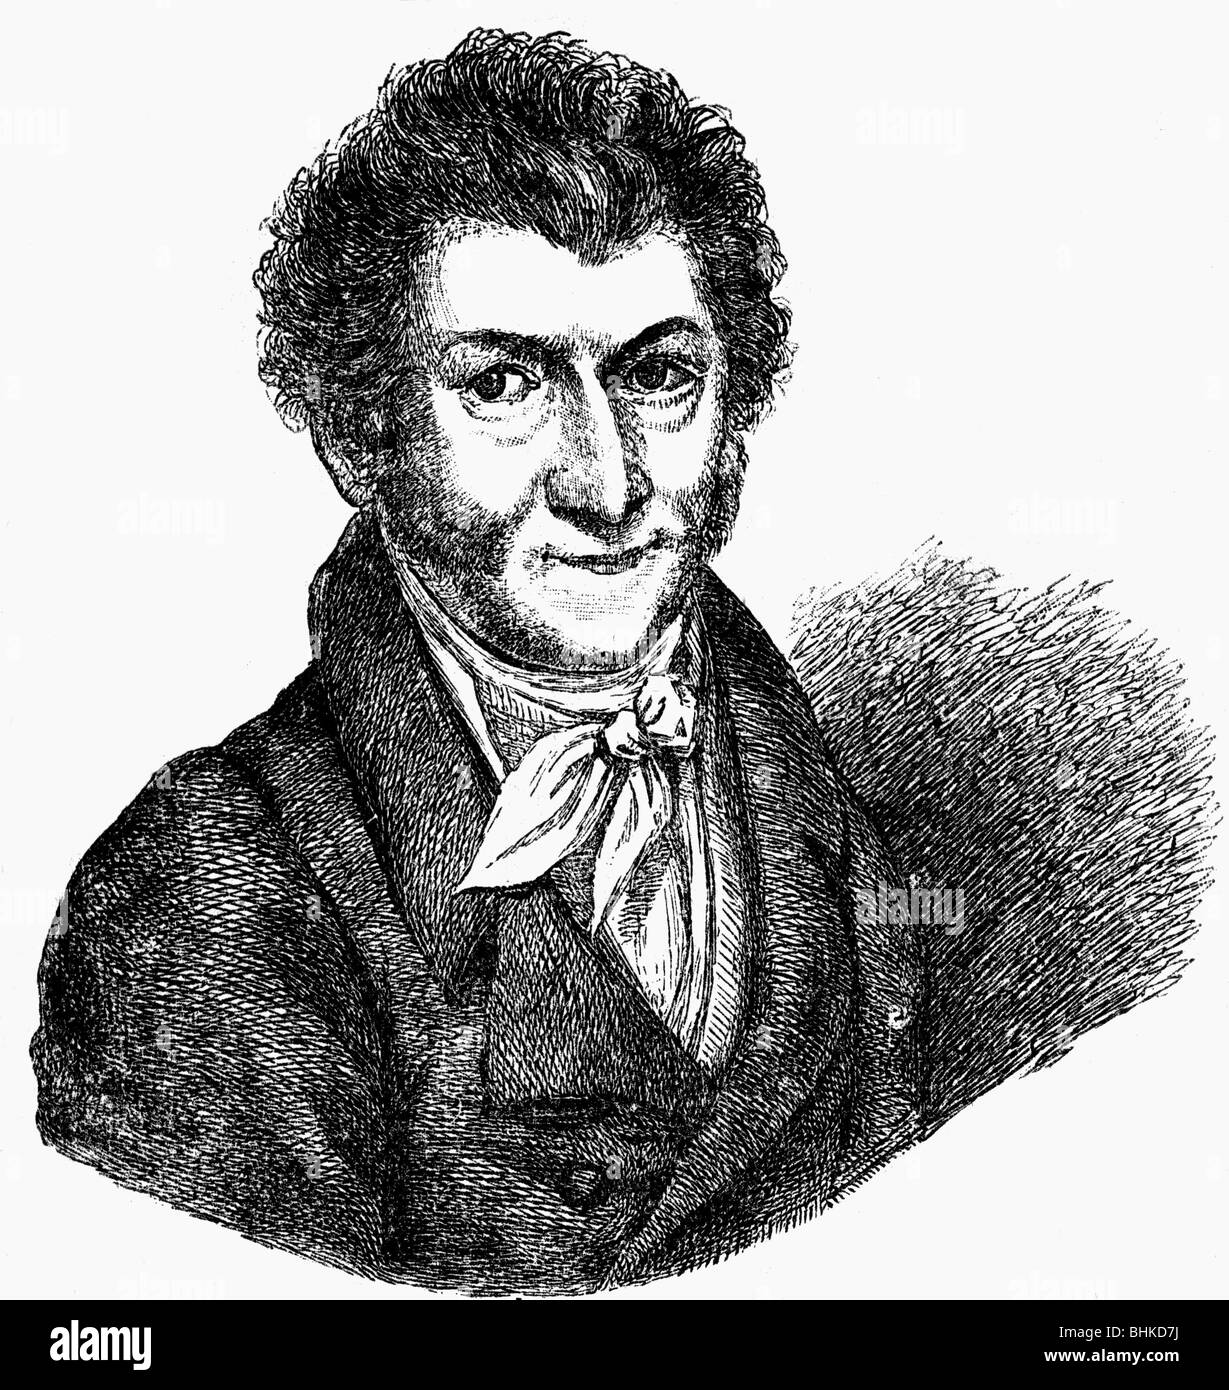 Hoffmann, E. T. A., 24.1.1776 - 25.6.1822, German author / writer, portrait, wood engraving after selfportrait, 19th century, Stock Photo